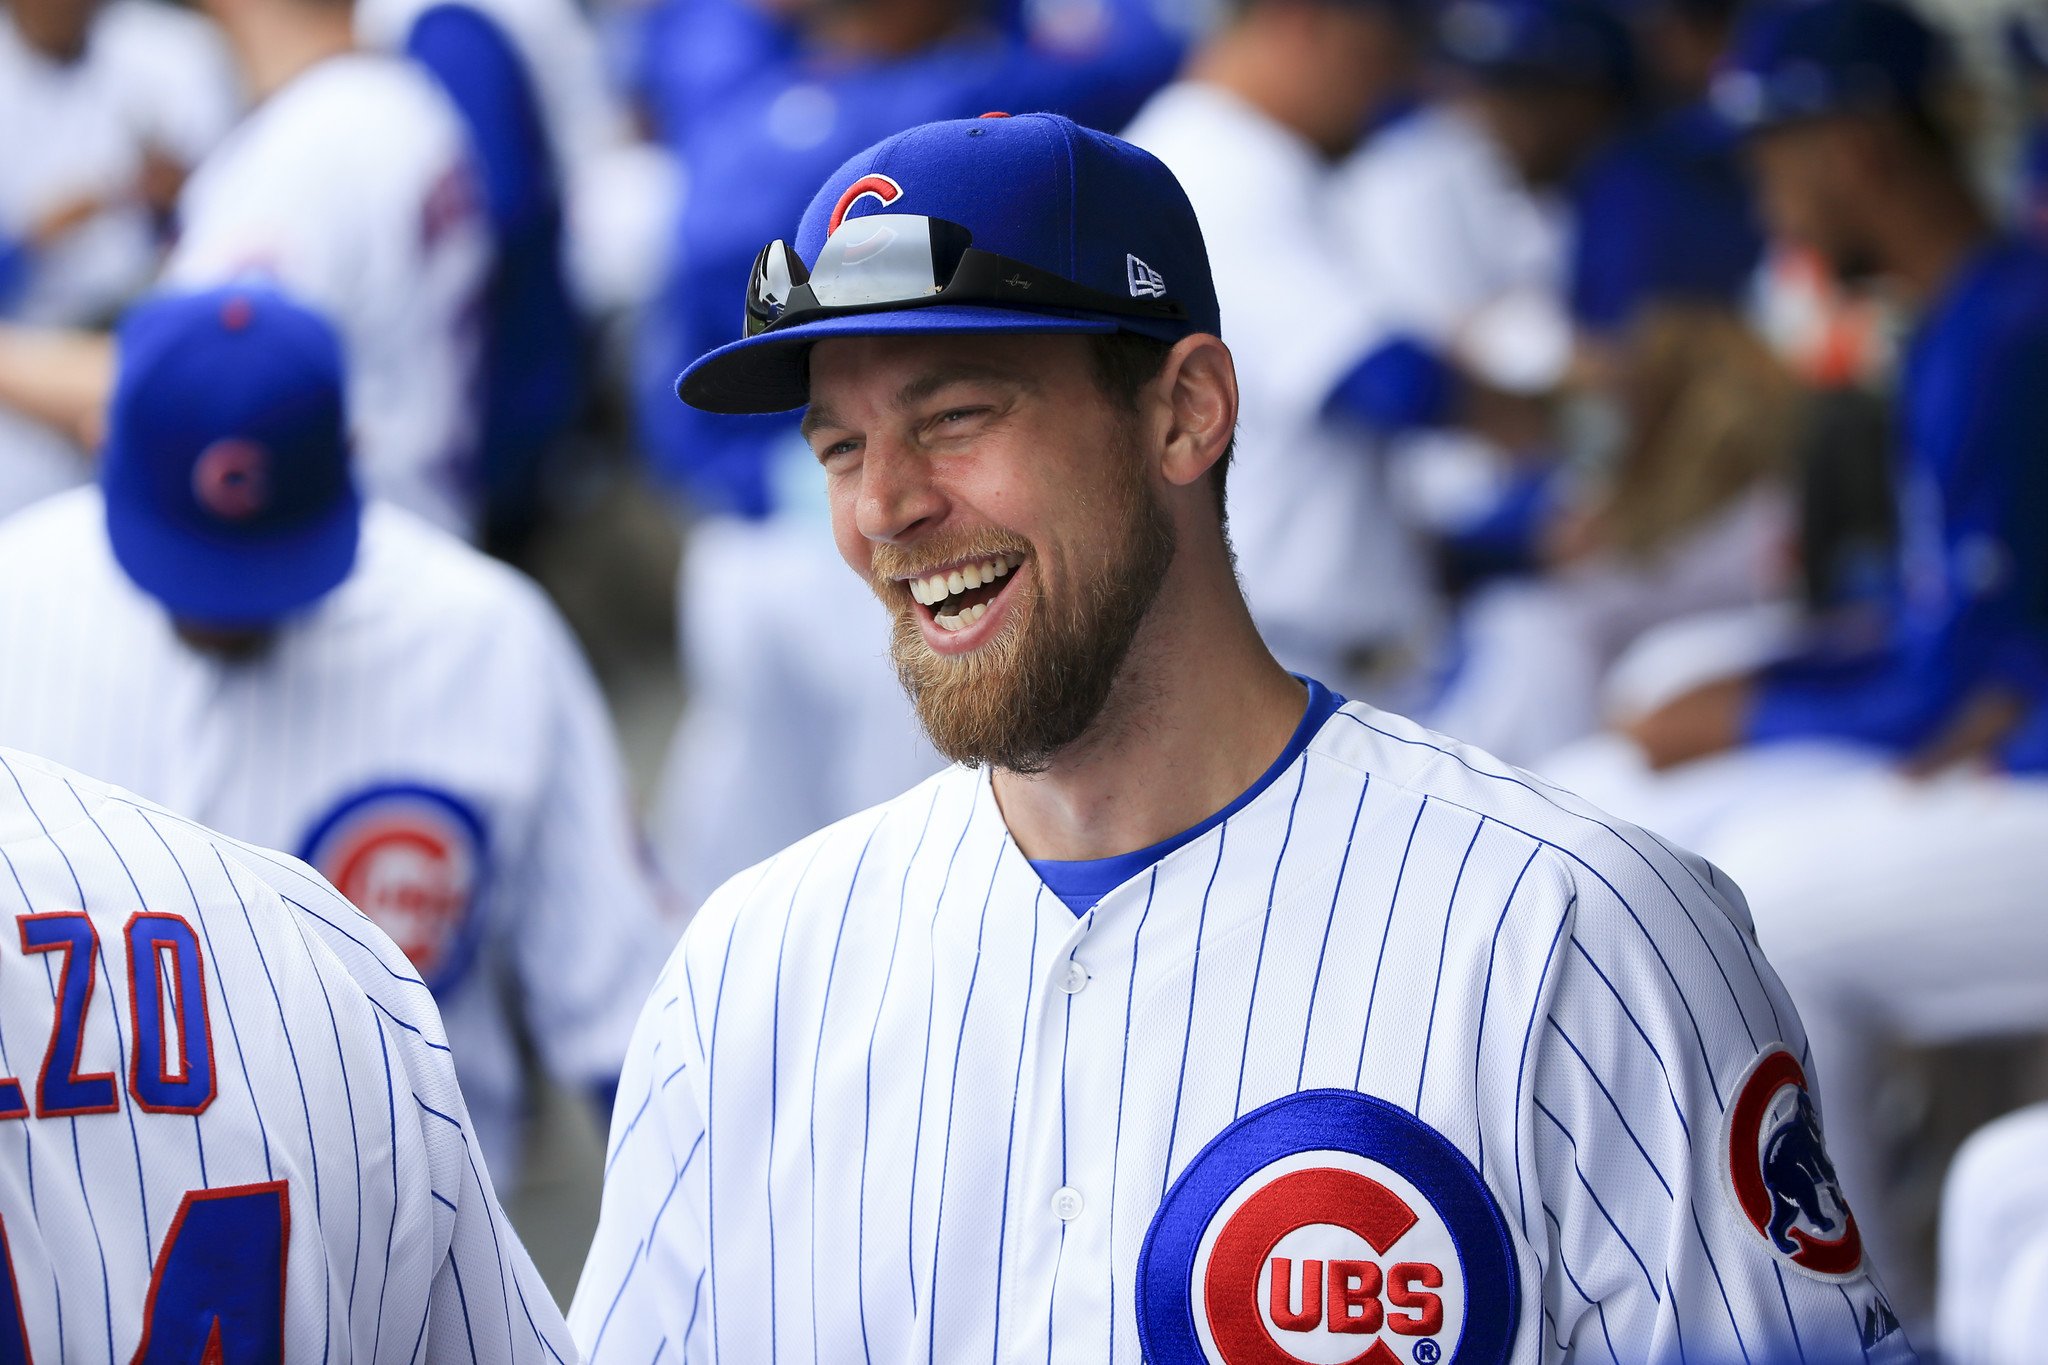 Ben Zobrist Is The Latest Cubs Player To Go On The DL